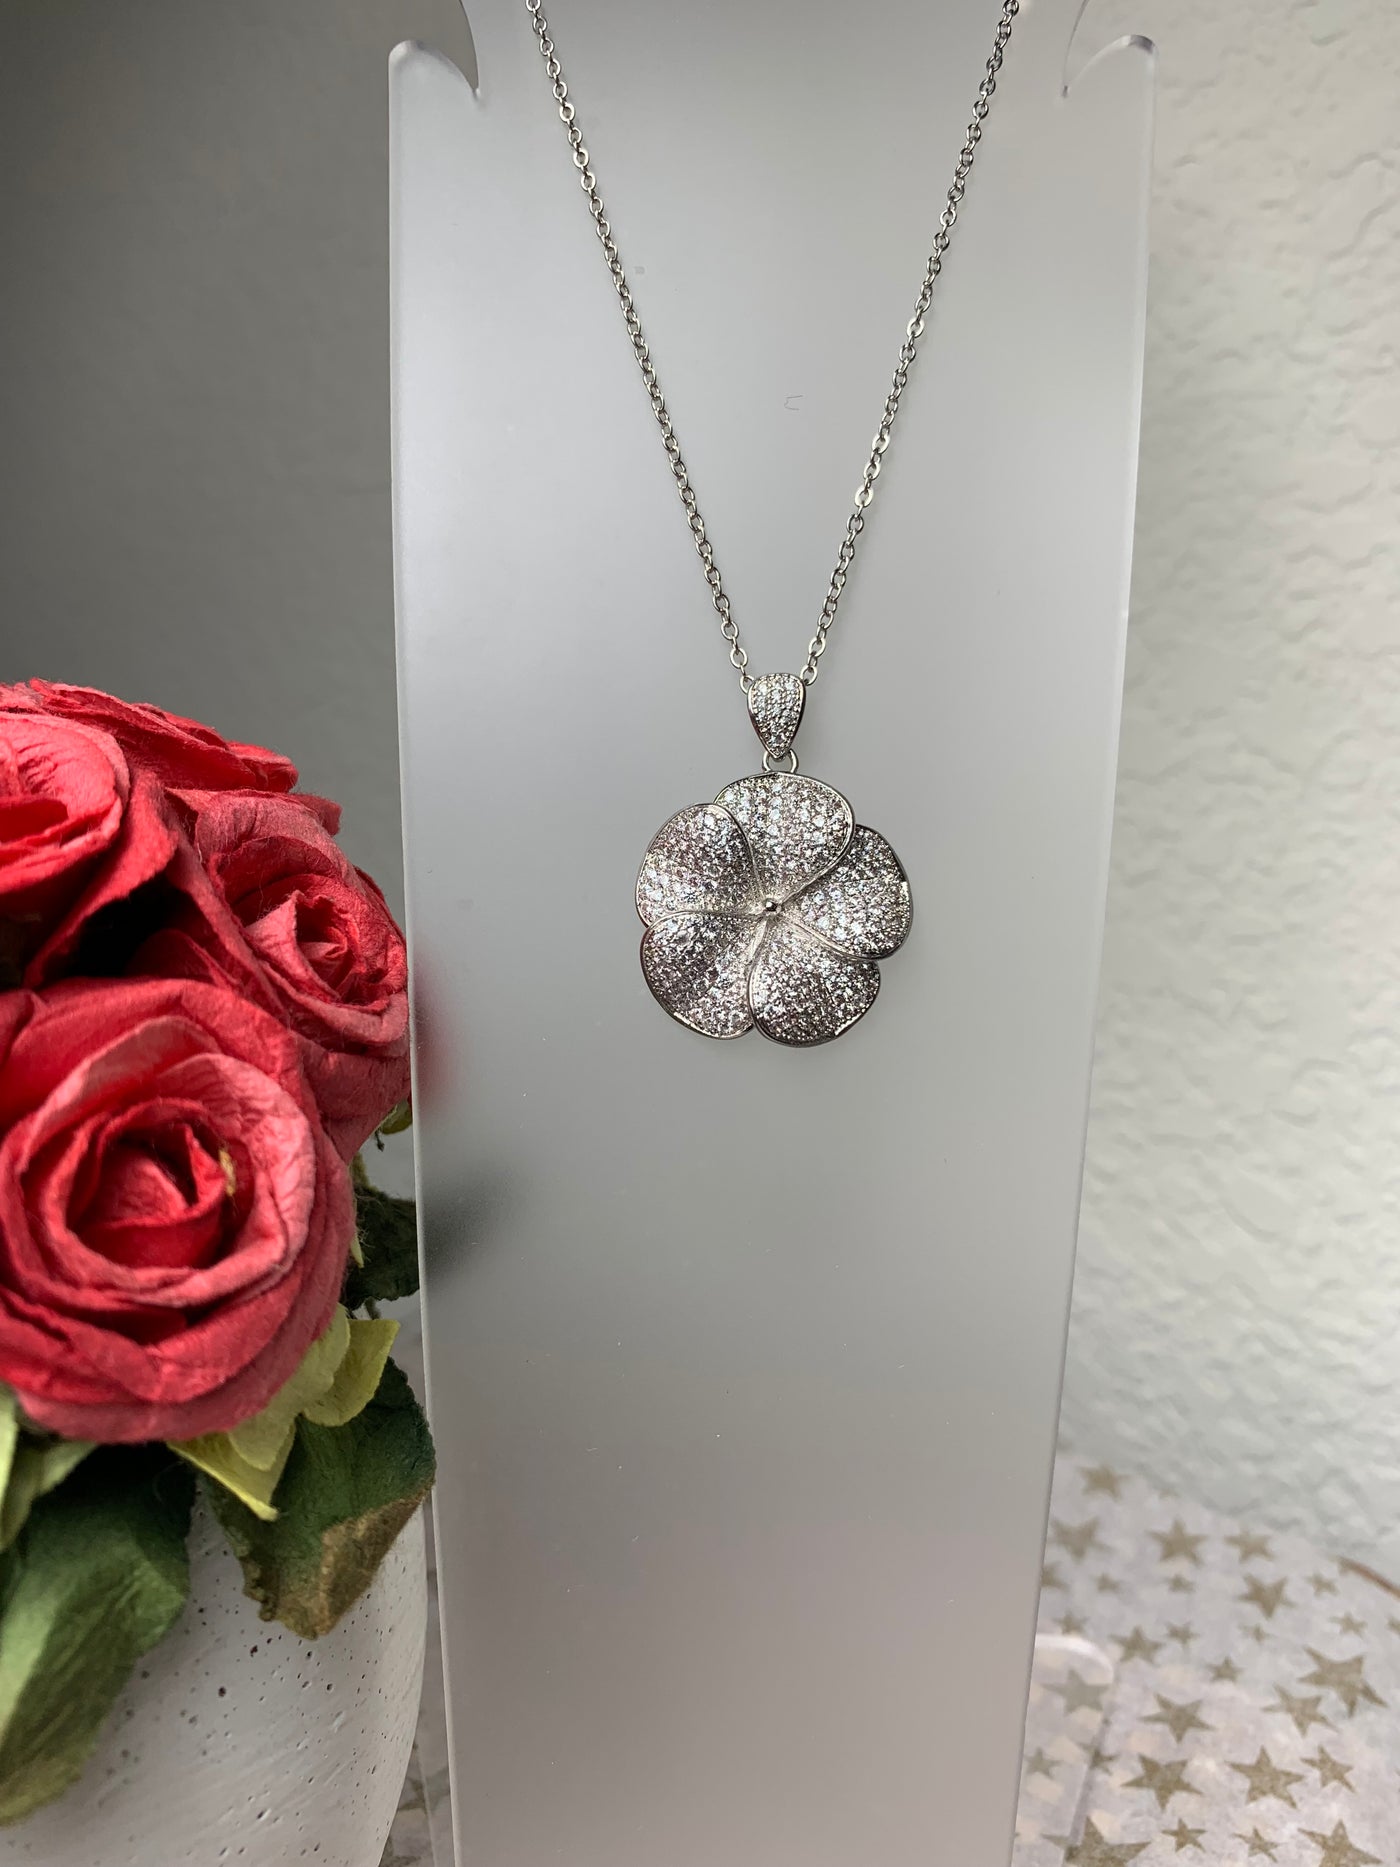 "Larger" Pave Set Cubic Zirconia Flower Pendant in Silver, Yellow and Rose Gold Tone